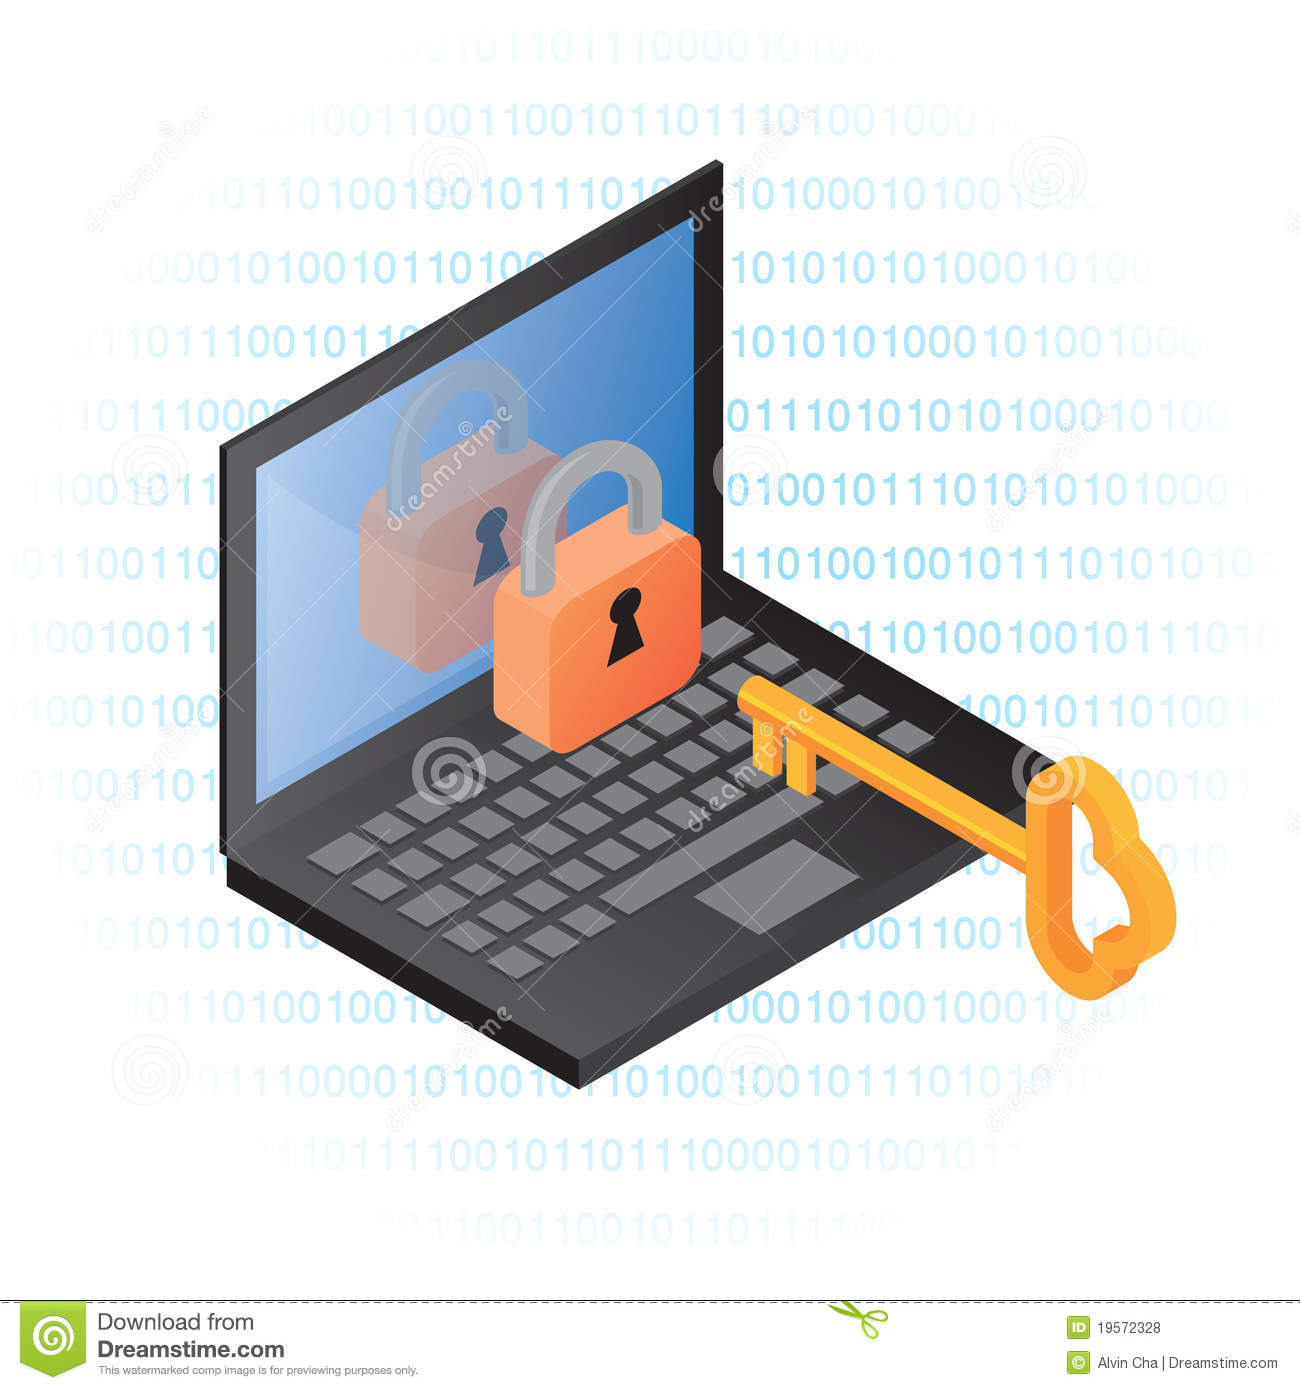 Computer Information Security Royalty Free Stock Photos   Image    